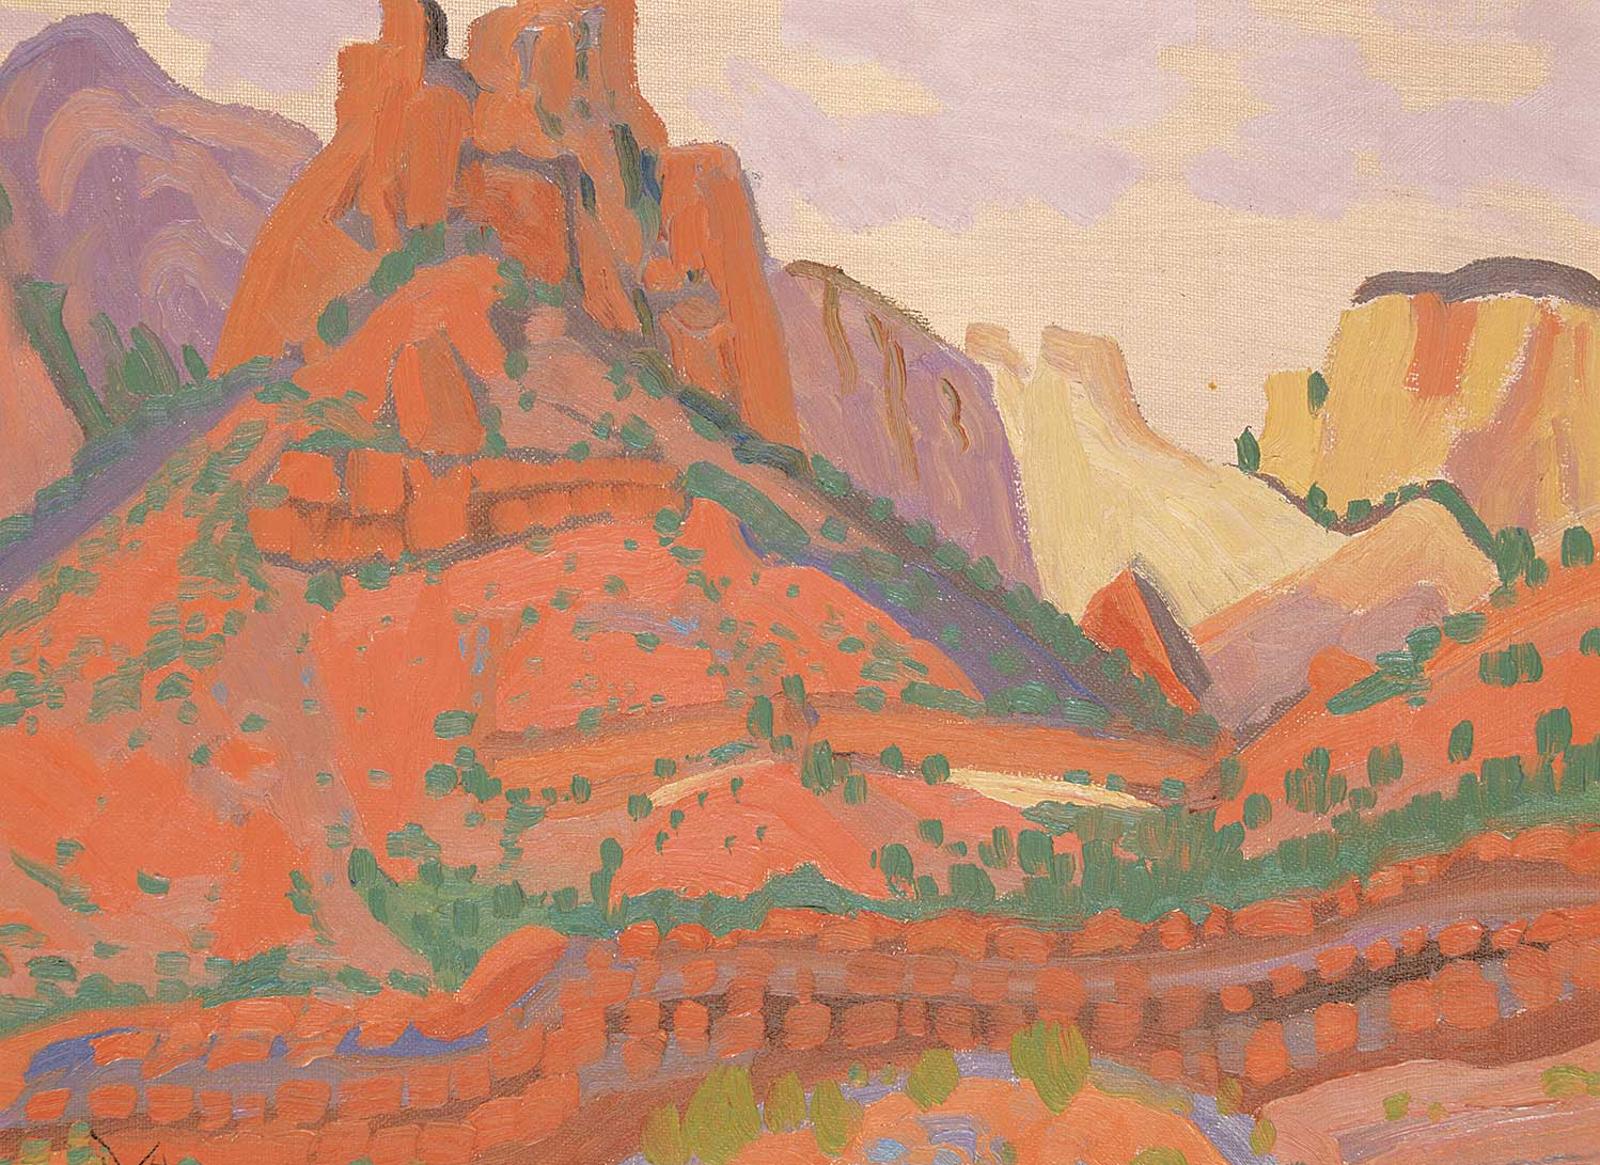 Illingworth Holey (Buck) Kerr (1905-1989) - The Beehive, at West Temple Zion Nat. Park, Utah